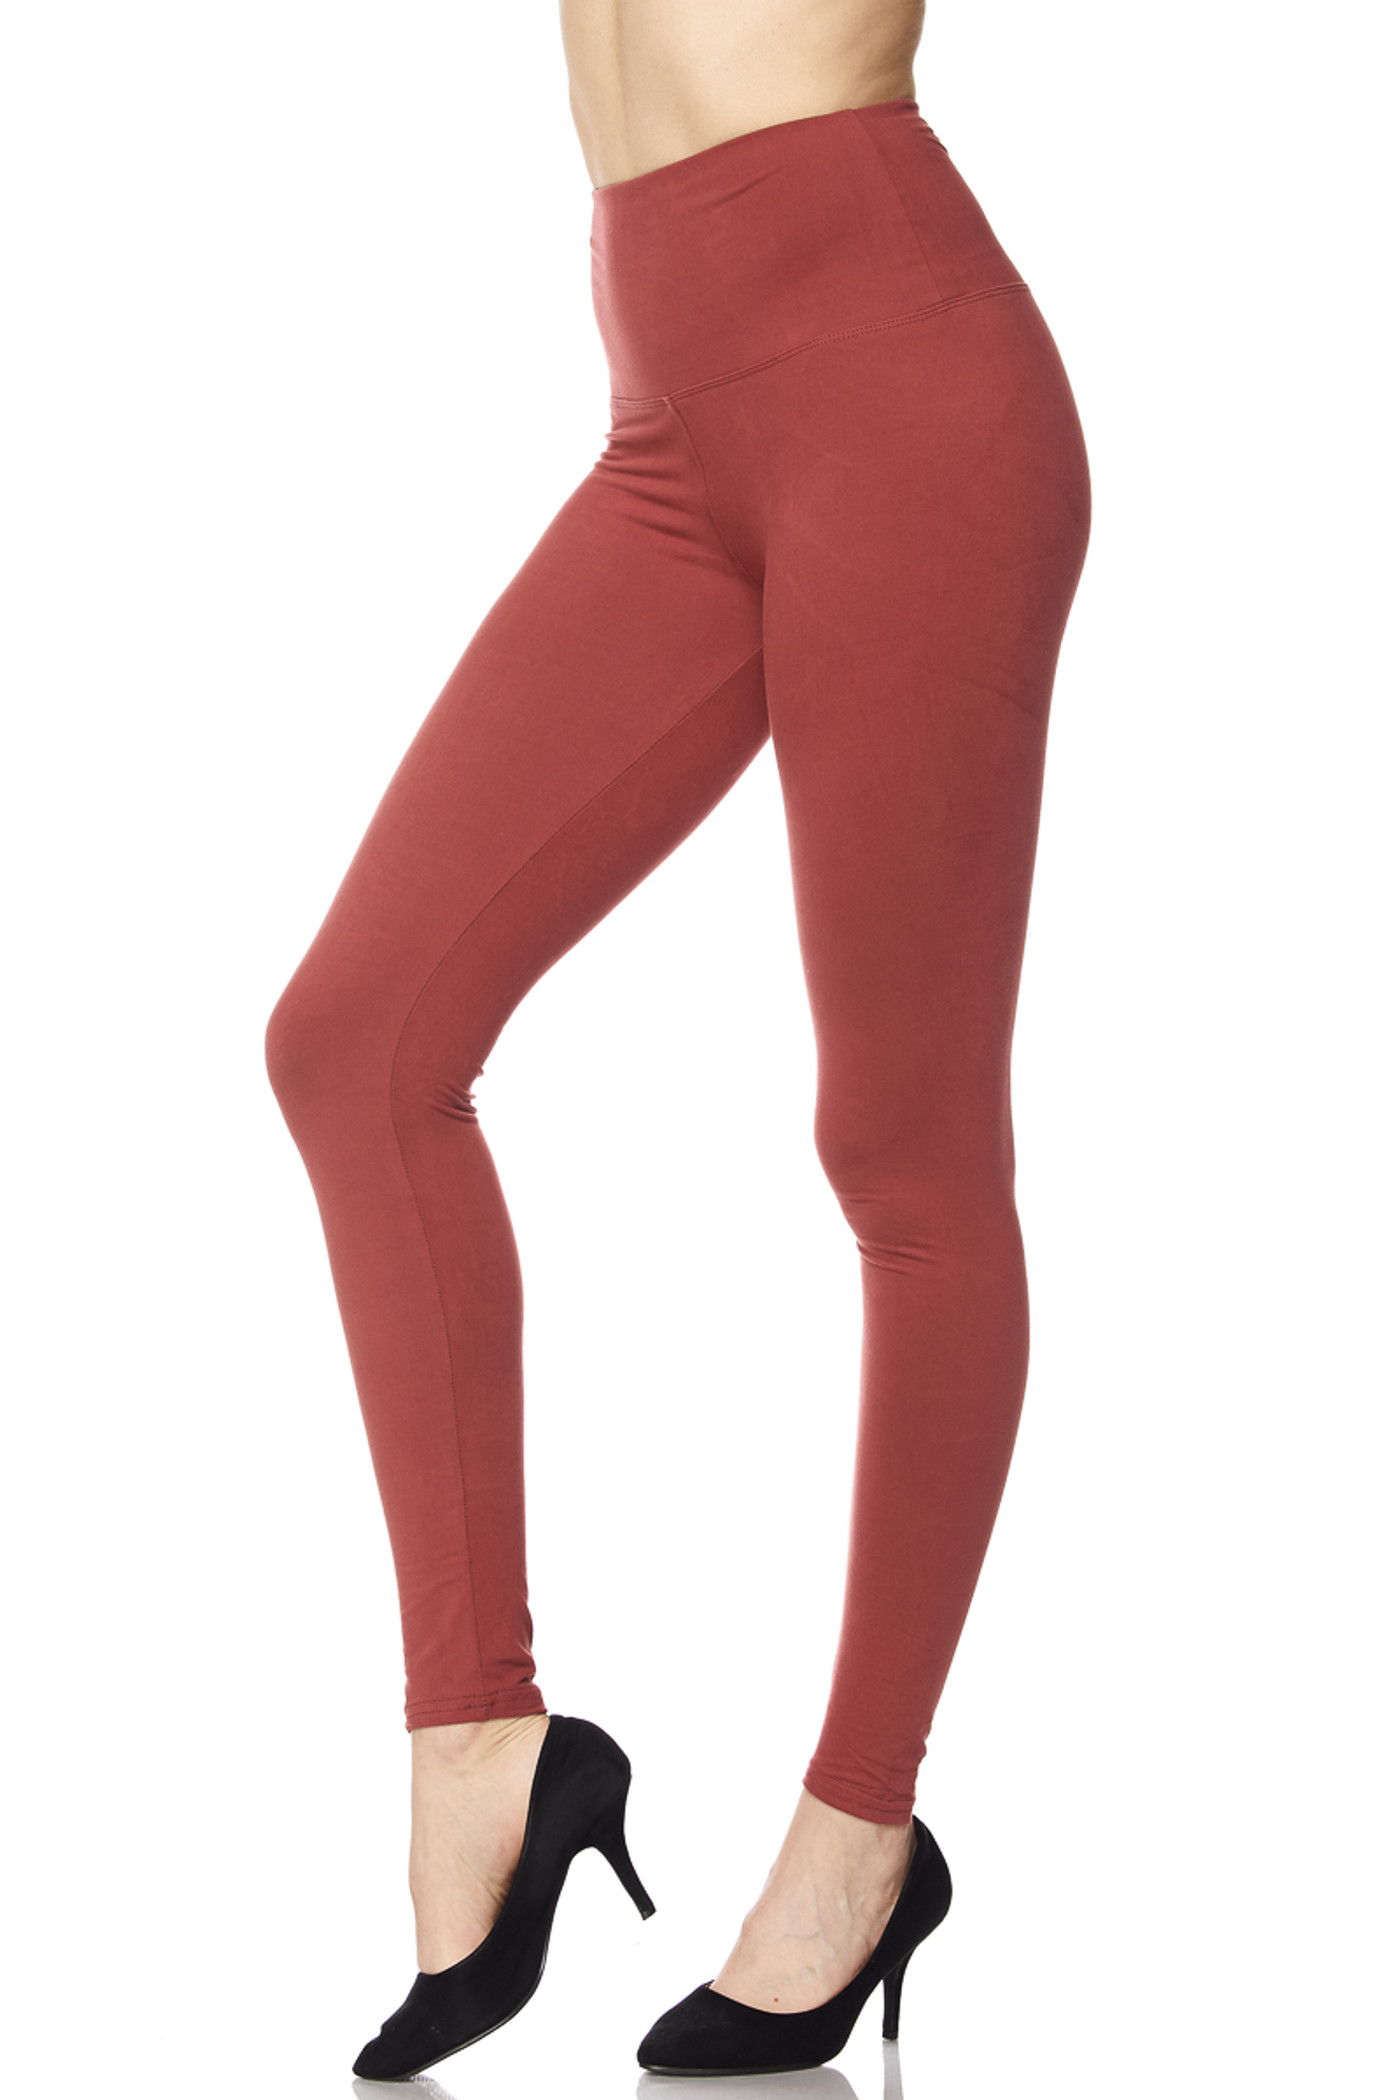 Brushed Basic Solid High Waisted Plus Size Leggings - 3X-5X - 5 Inch